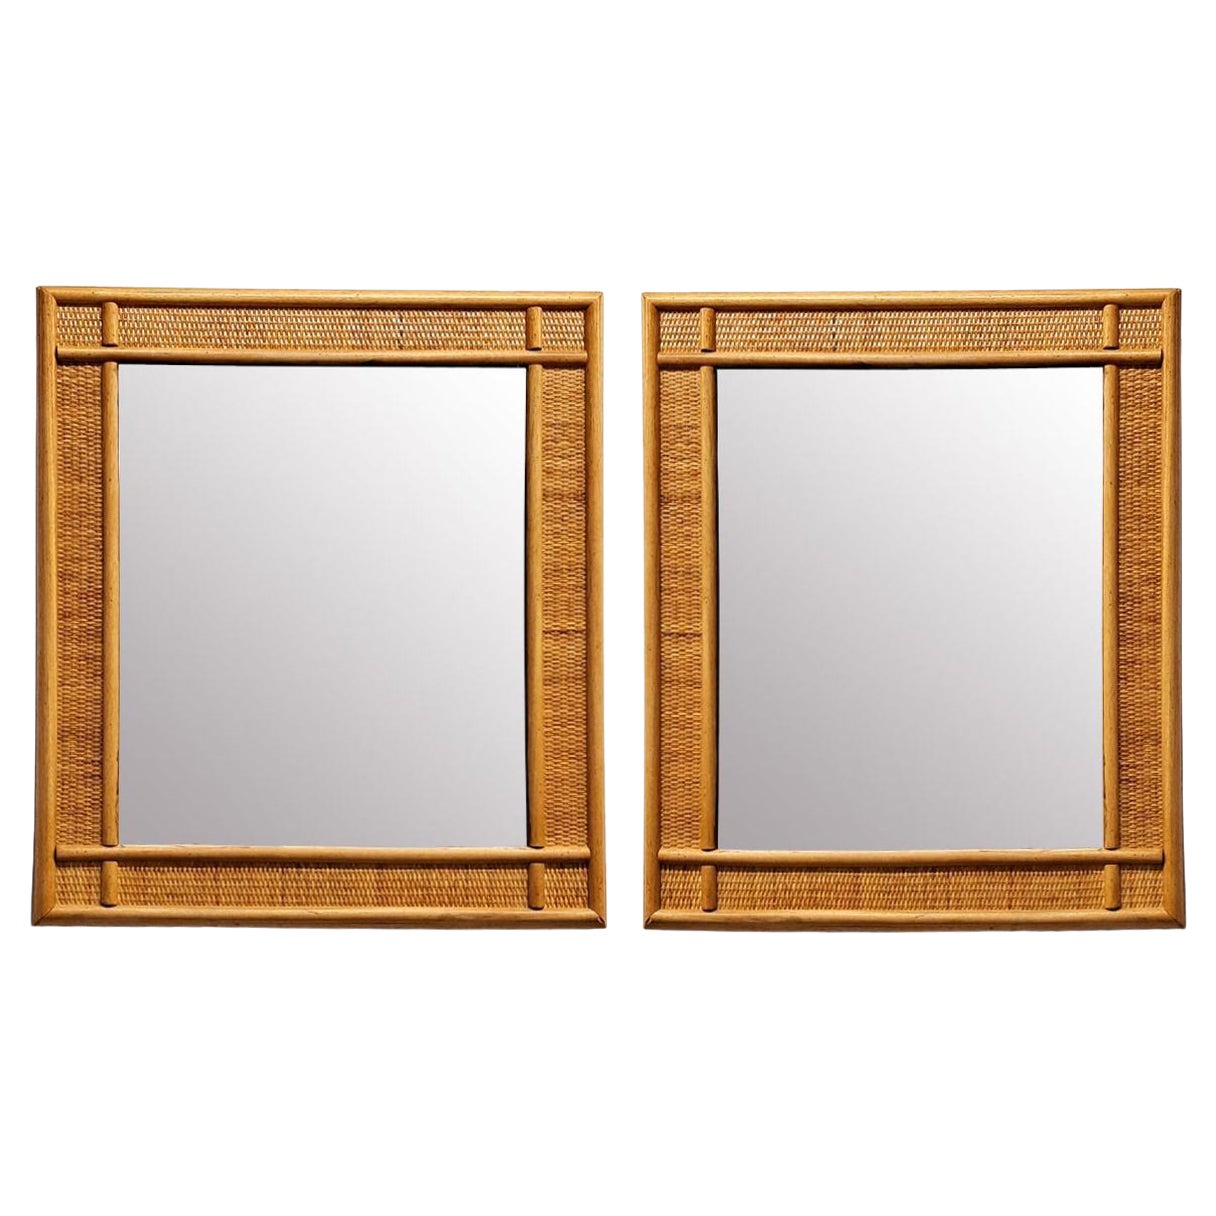 Pair of Italian Mirrors with Bamboo Cane Frame, 1970s